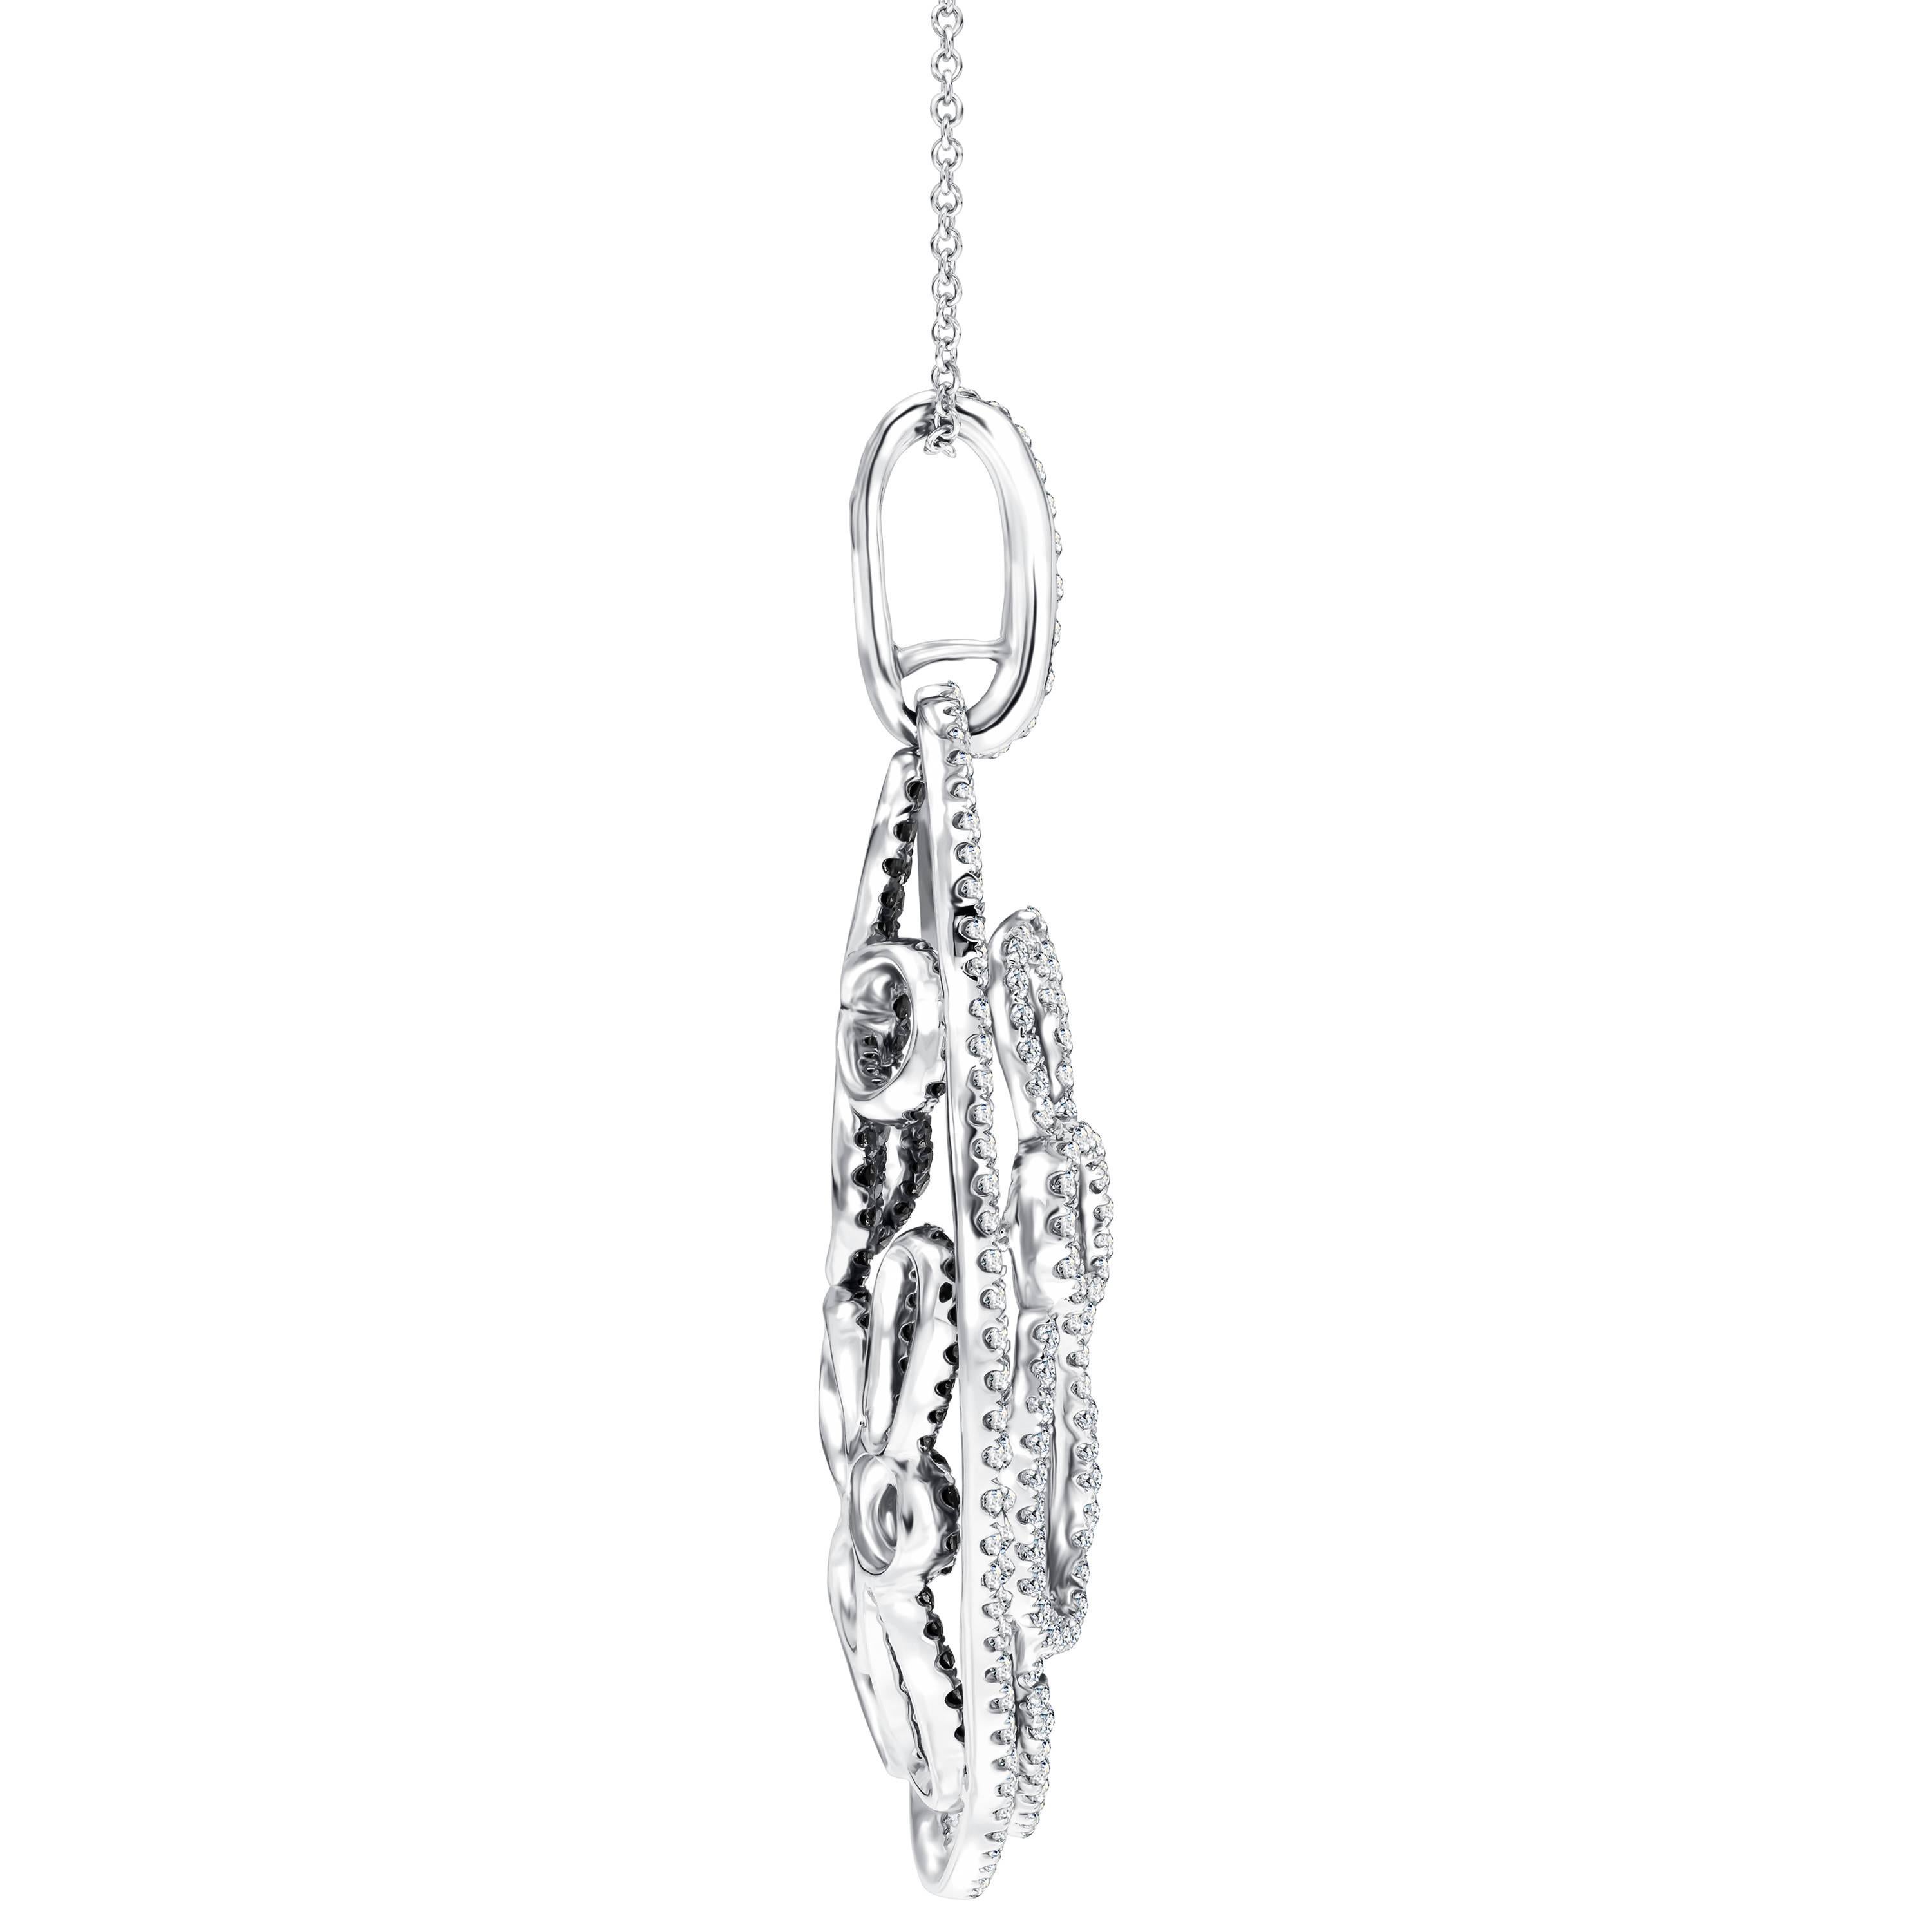 Modern Fancy floral pendant in 18k white gold with 1.81 carat black and white diamonds